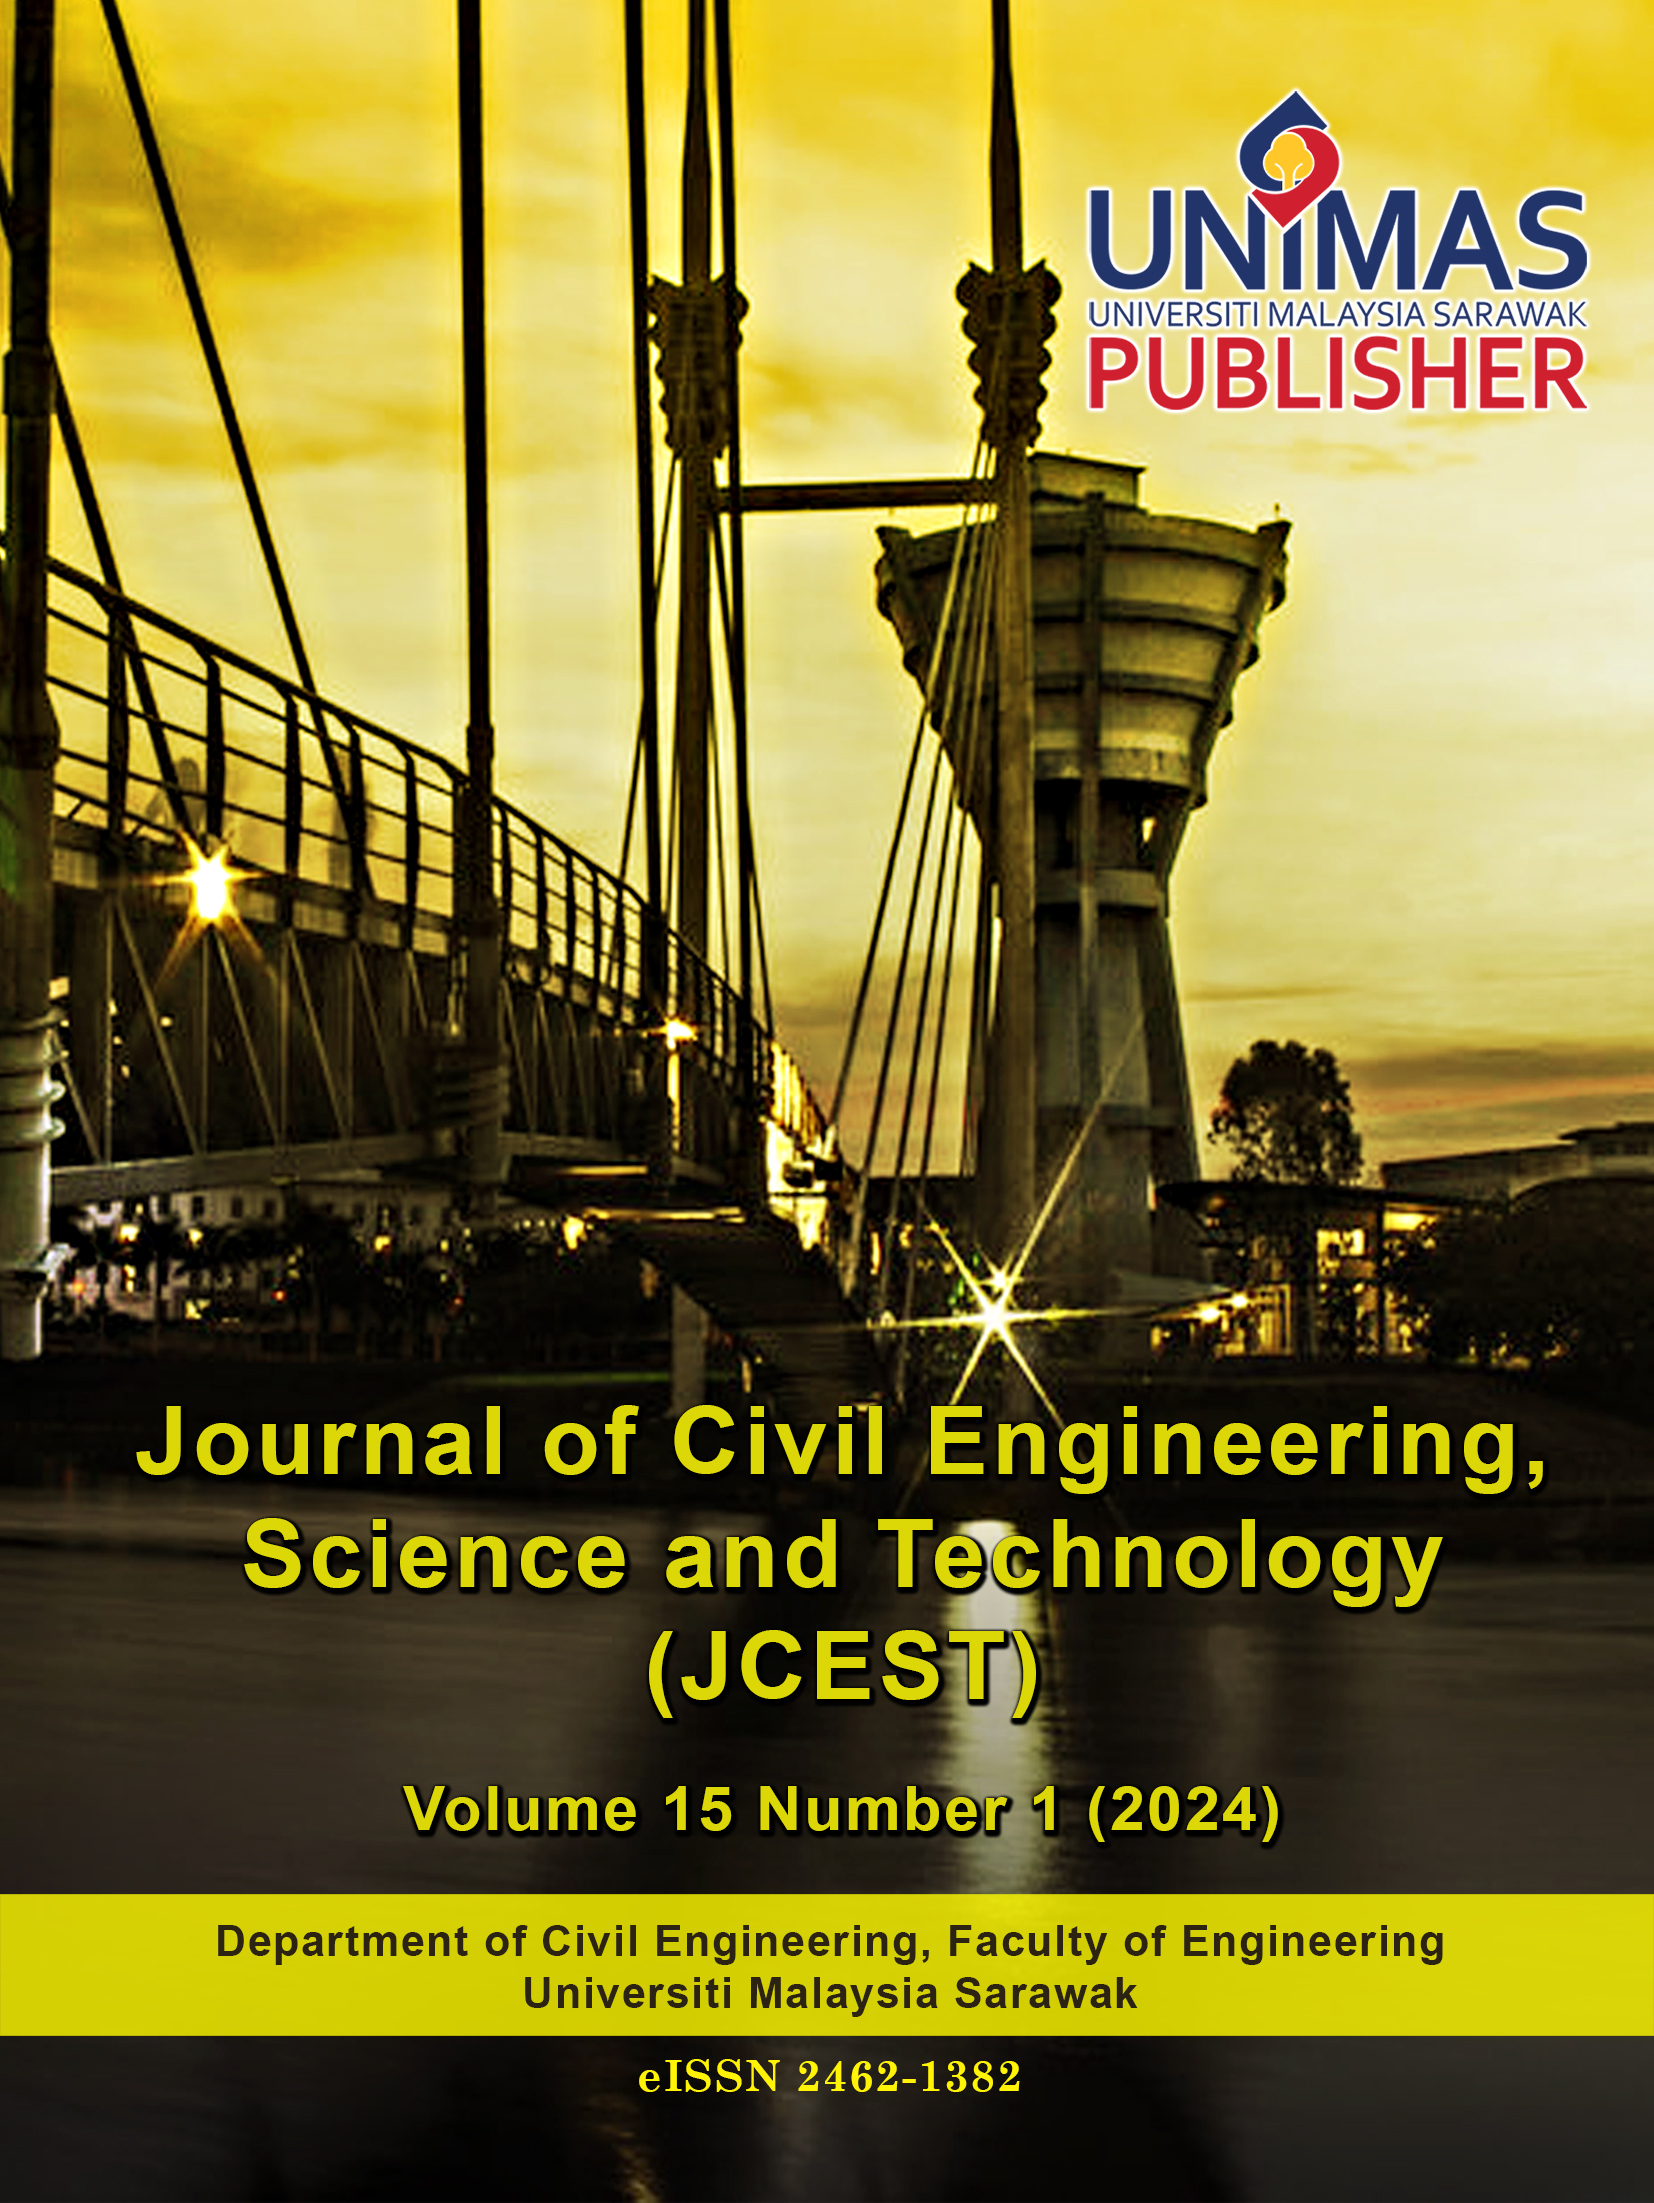 					View Vol. 15 No. 1 (2024): Journal of Civil Engineering, Science and Technology
				